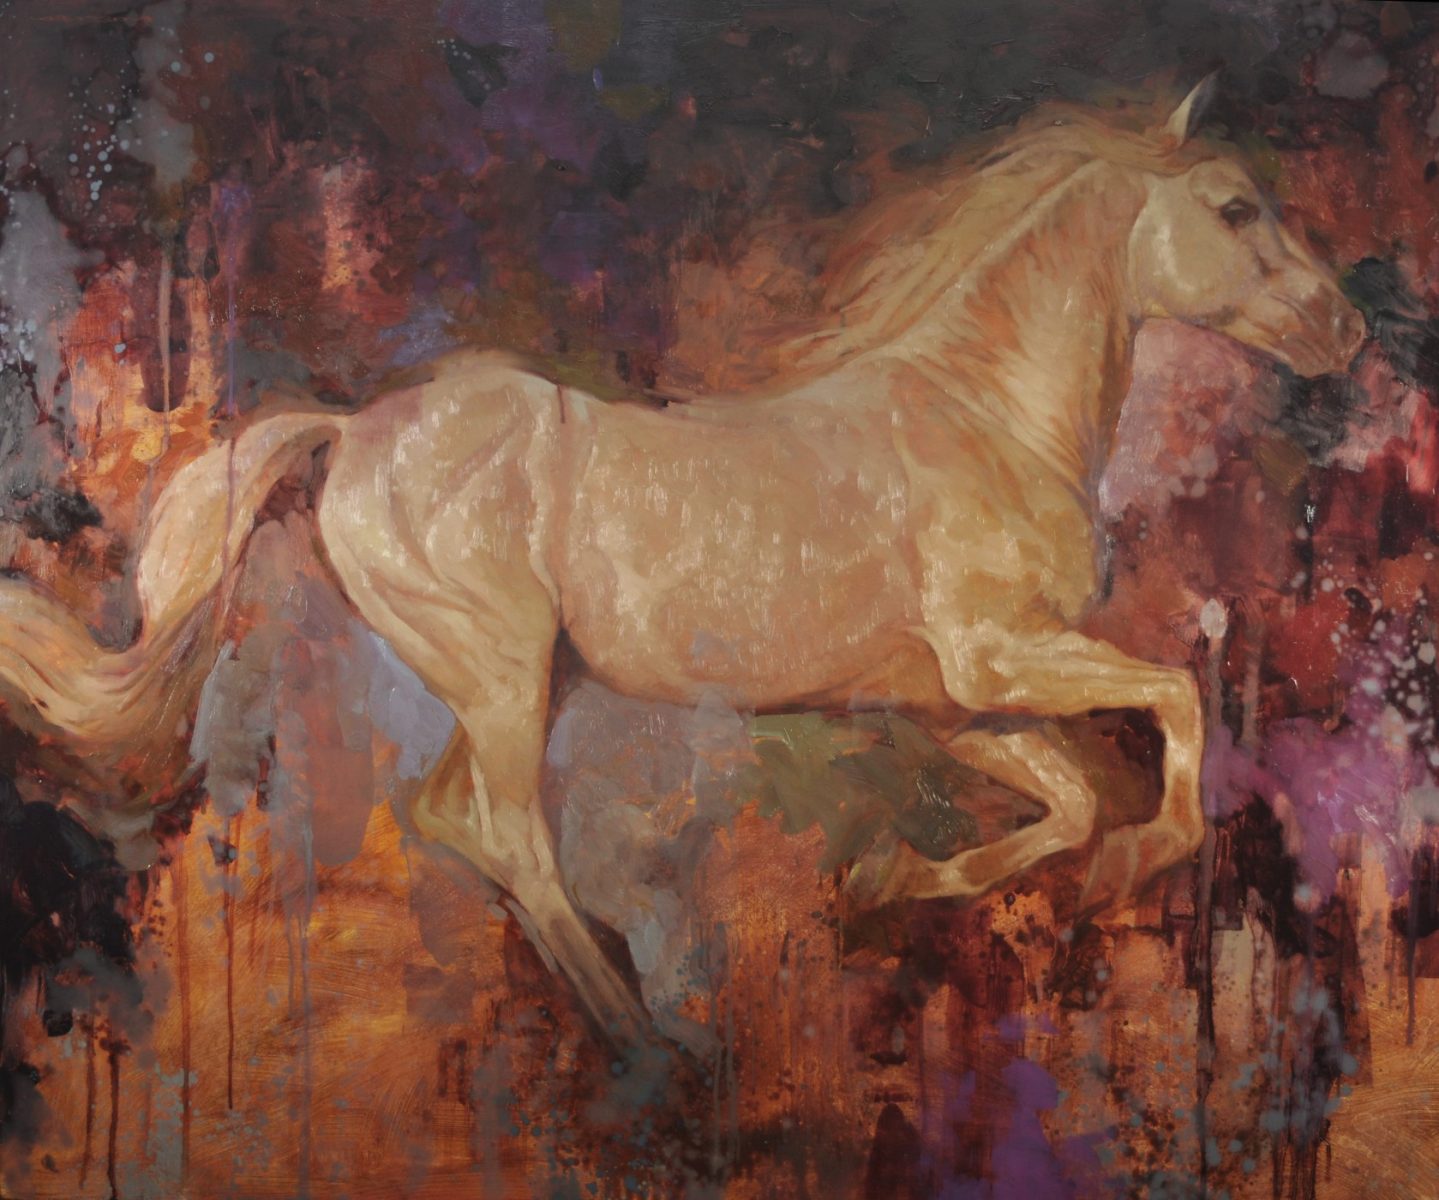 Fury painting of a horse by Joseph Lorusso